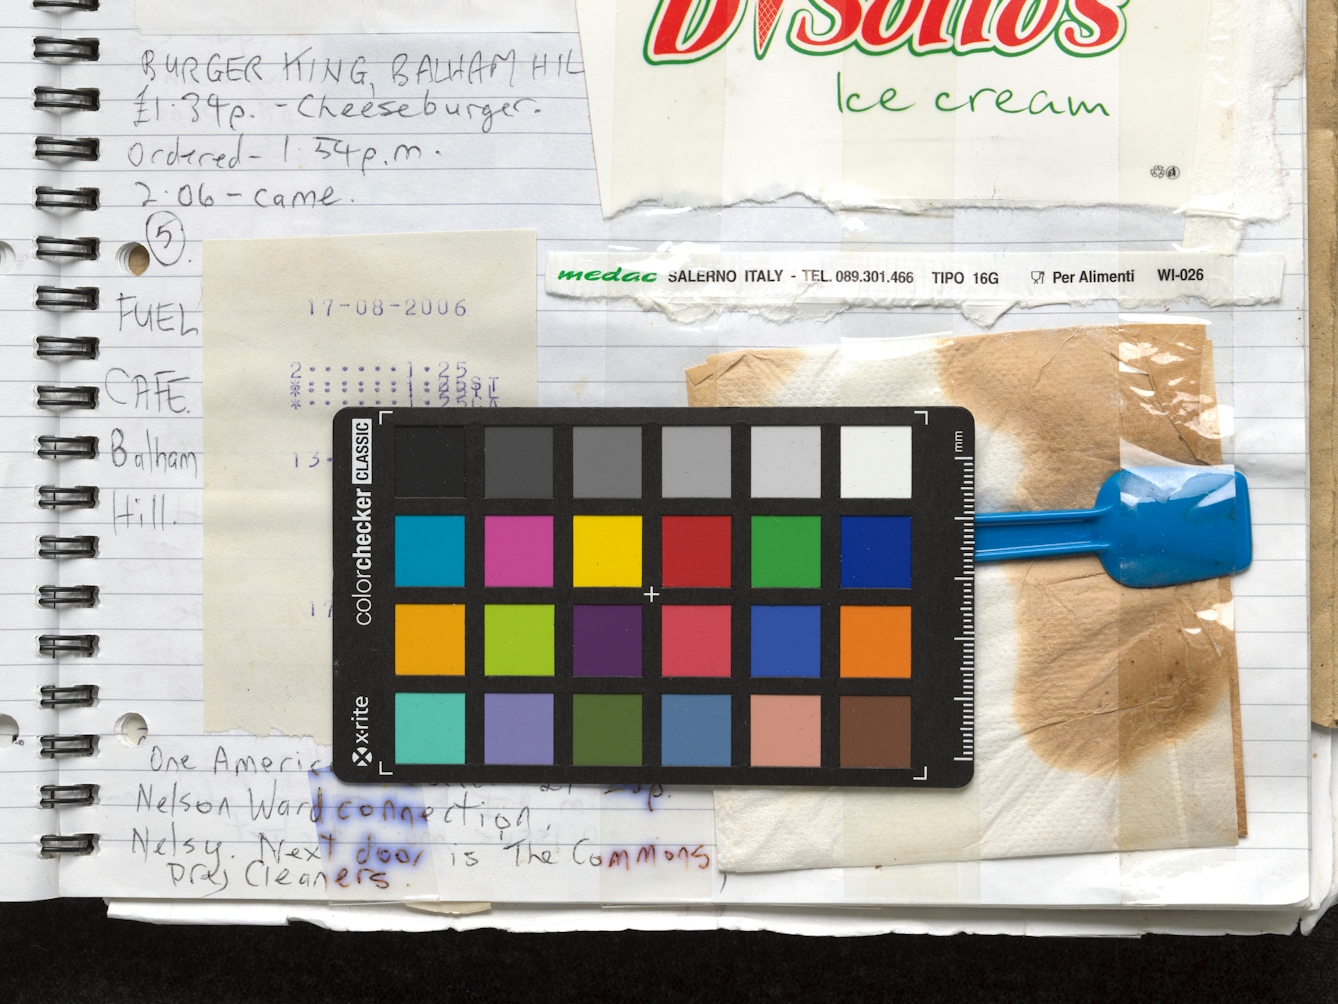 Photograph of a close-up of the lower right hand section of a lines scrapbook. The page contains handwritten notes and receipts, food packaging and napkins have been Sellotaped to the page. Resting on top of the page is a 24 colour patch photographic card, complete with ruled edge in millimetres. The text on the card reads 'ColourChecker'.